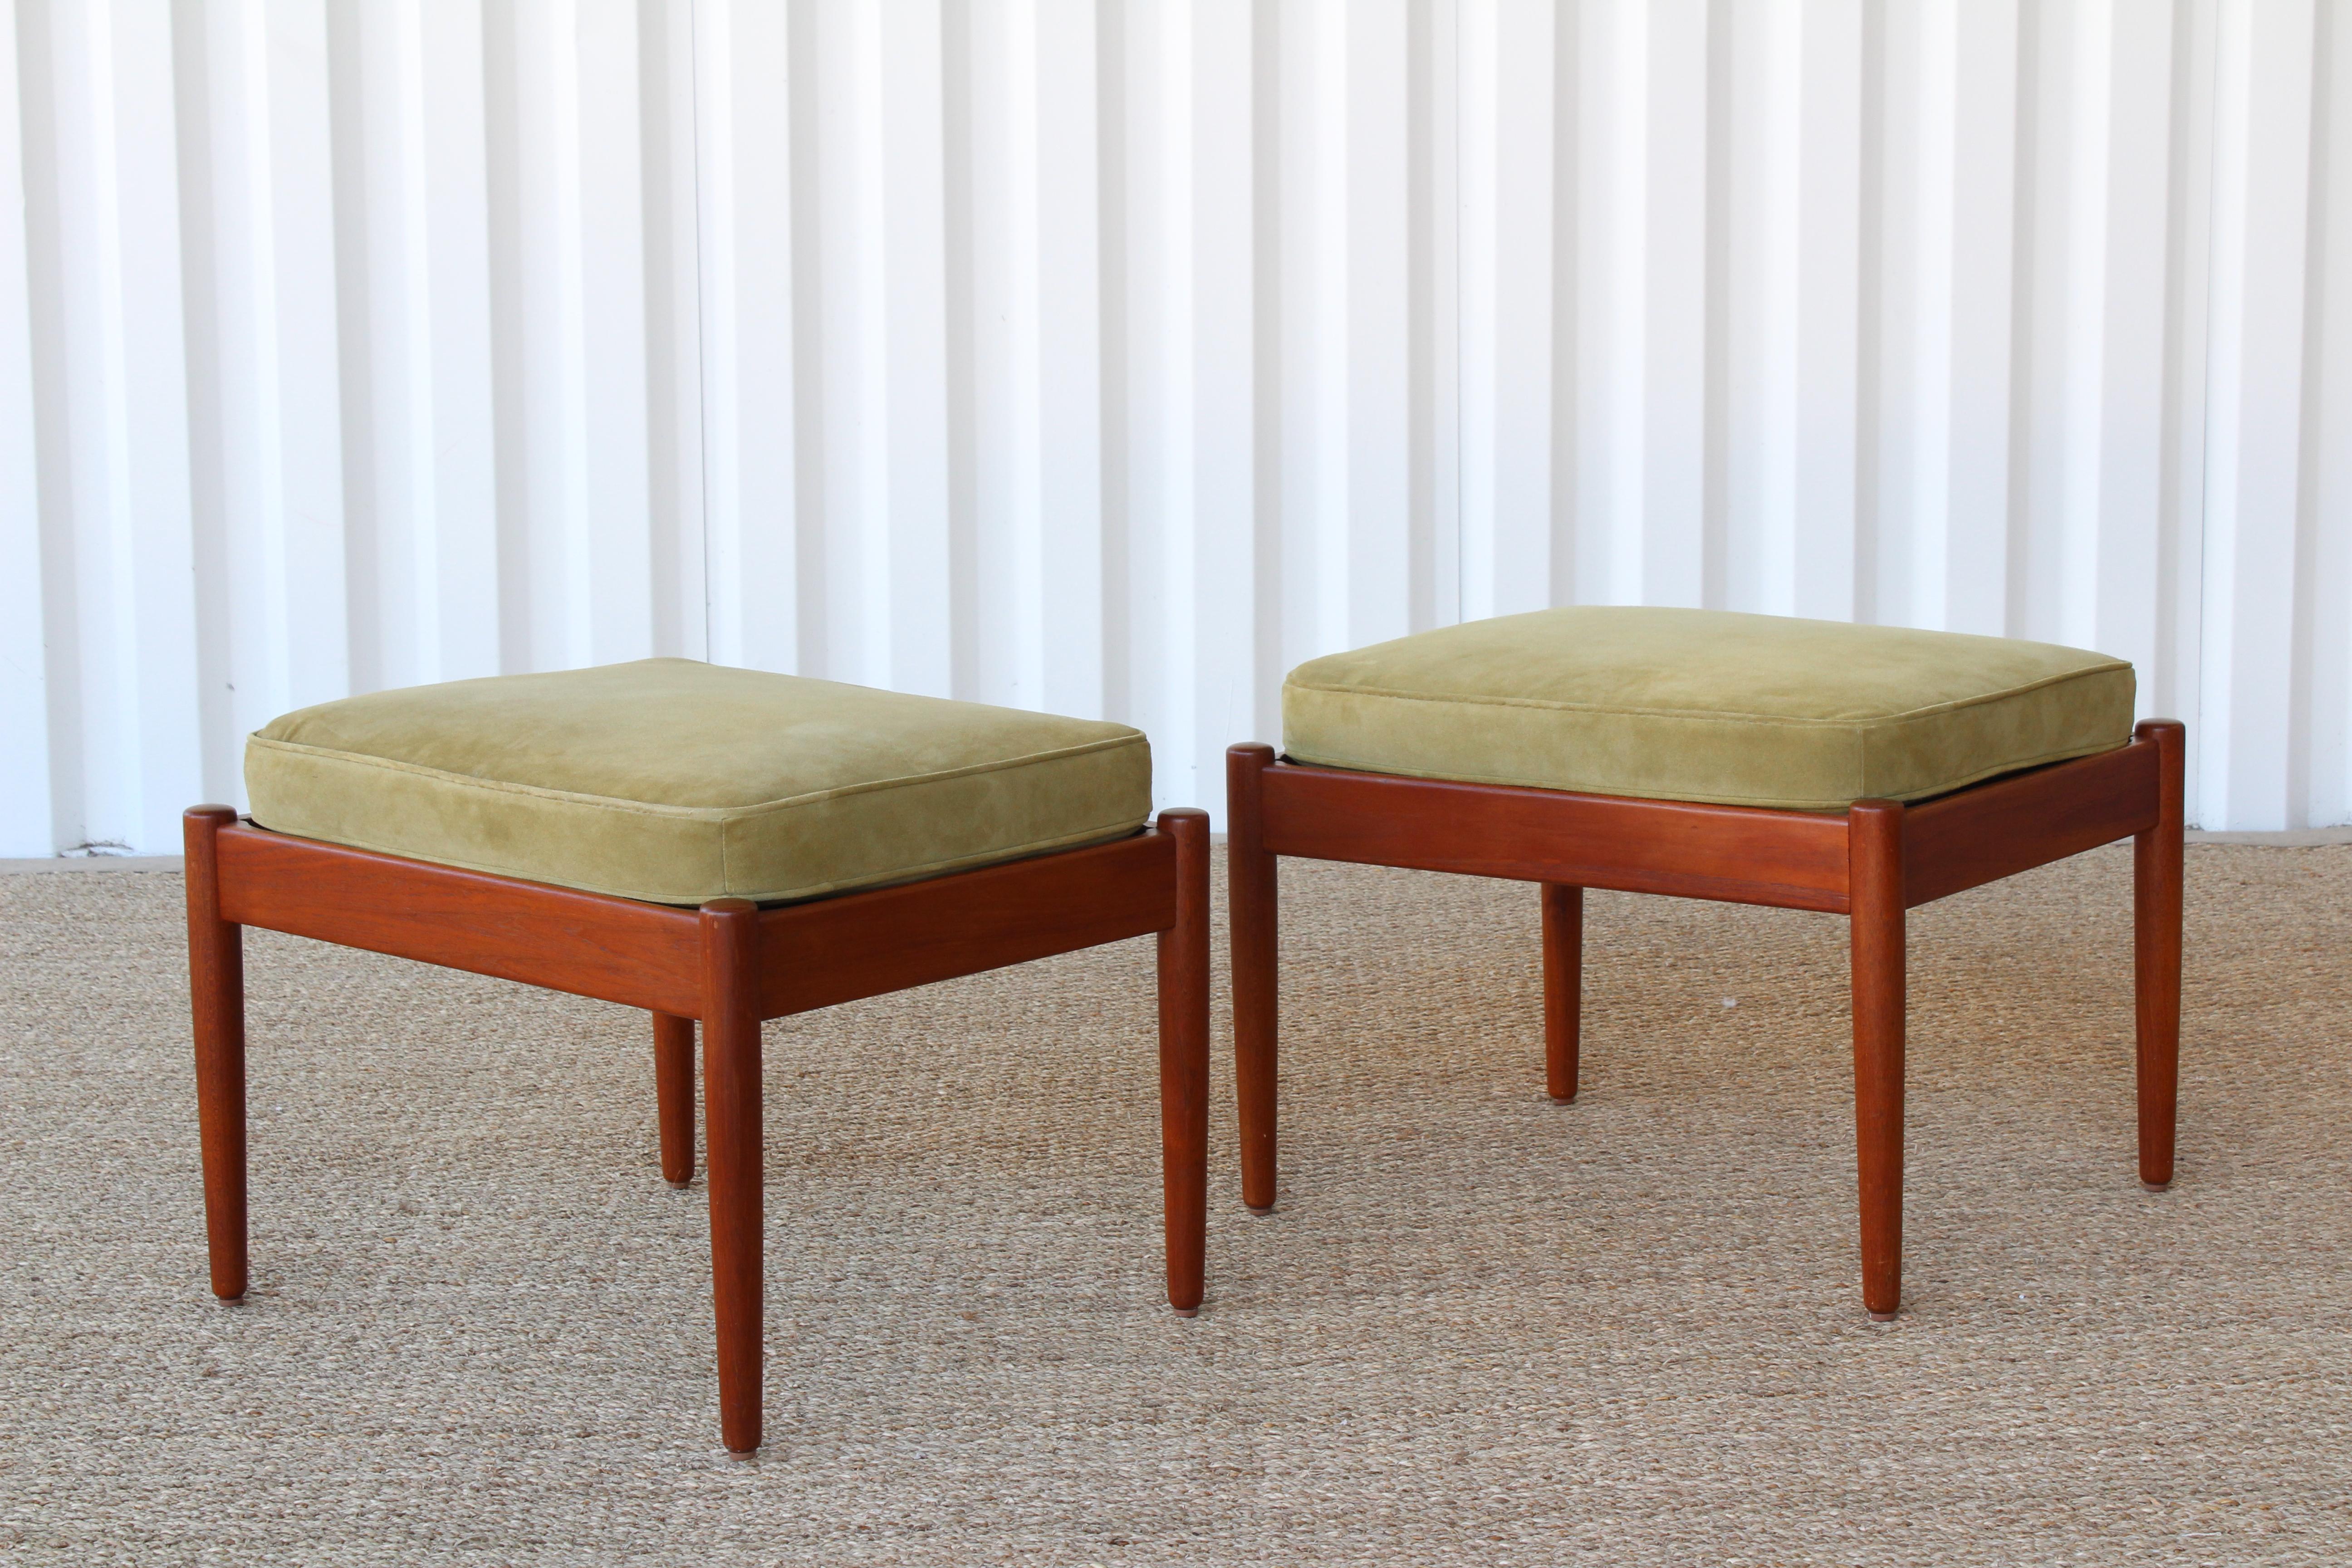 Danish Pair of Teak Stools with Suede Cushions, Denmark, 1960s